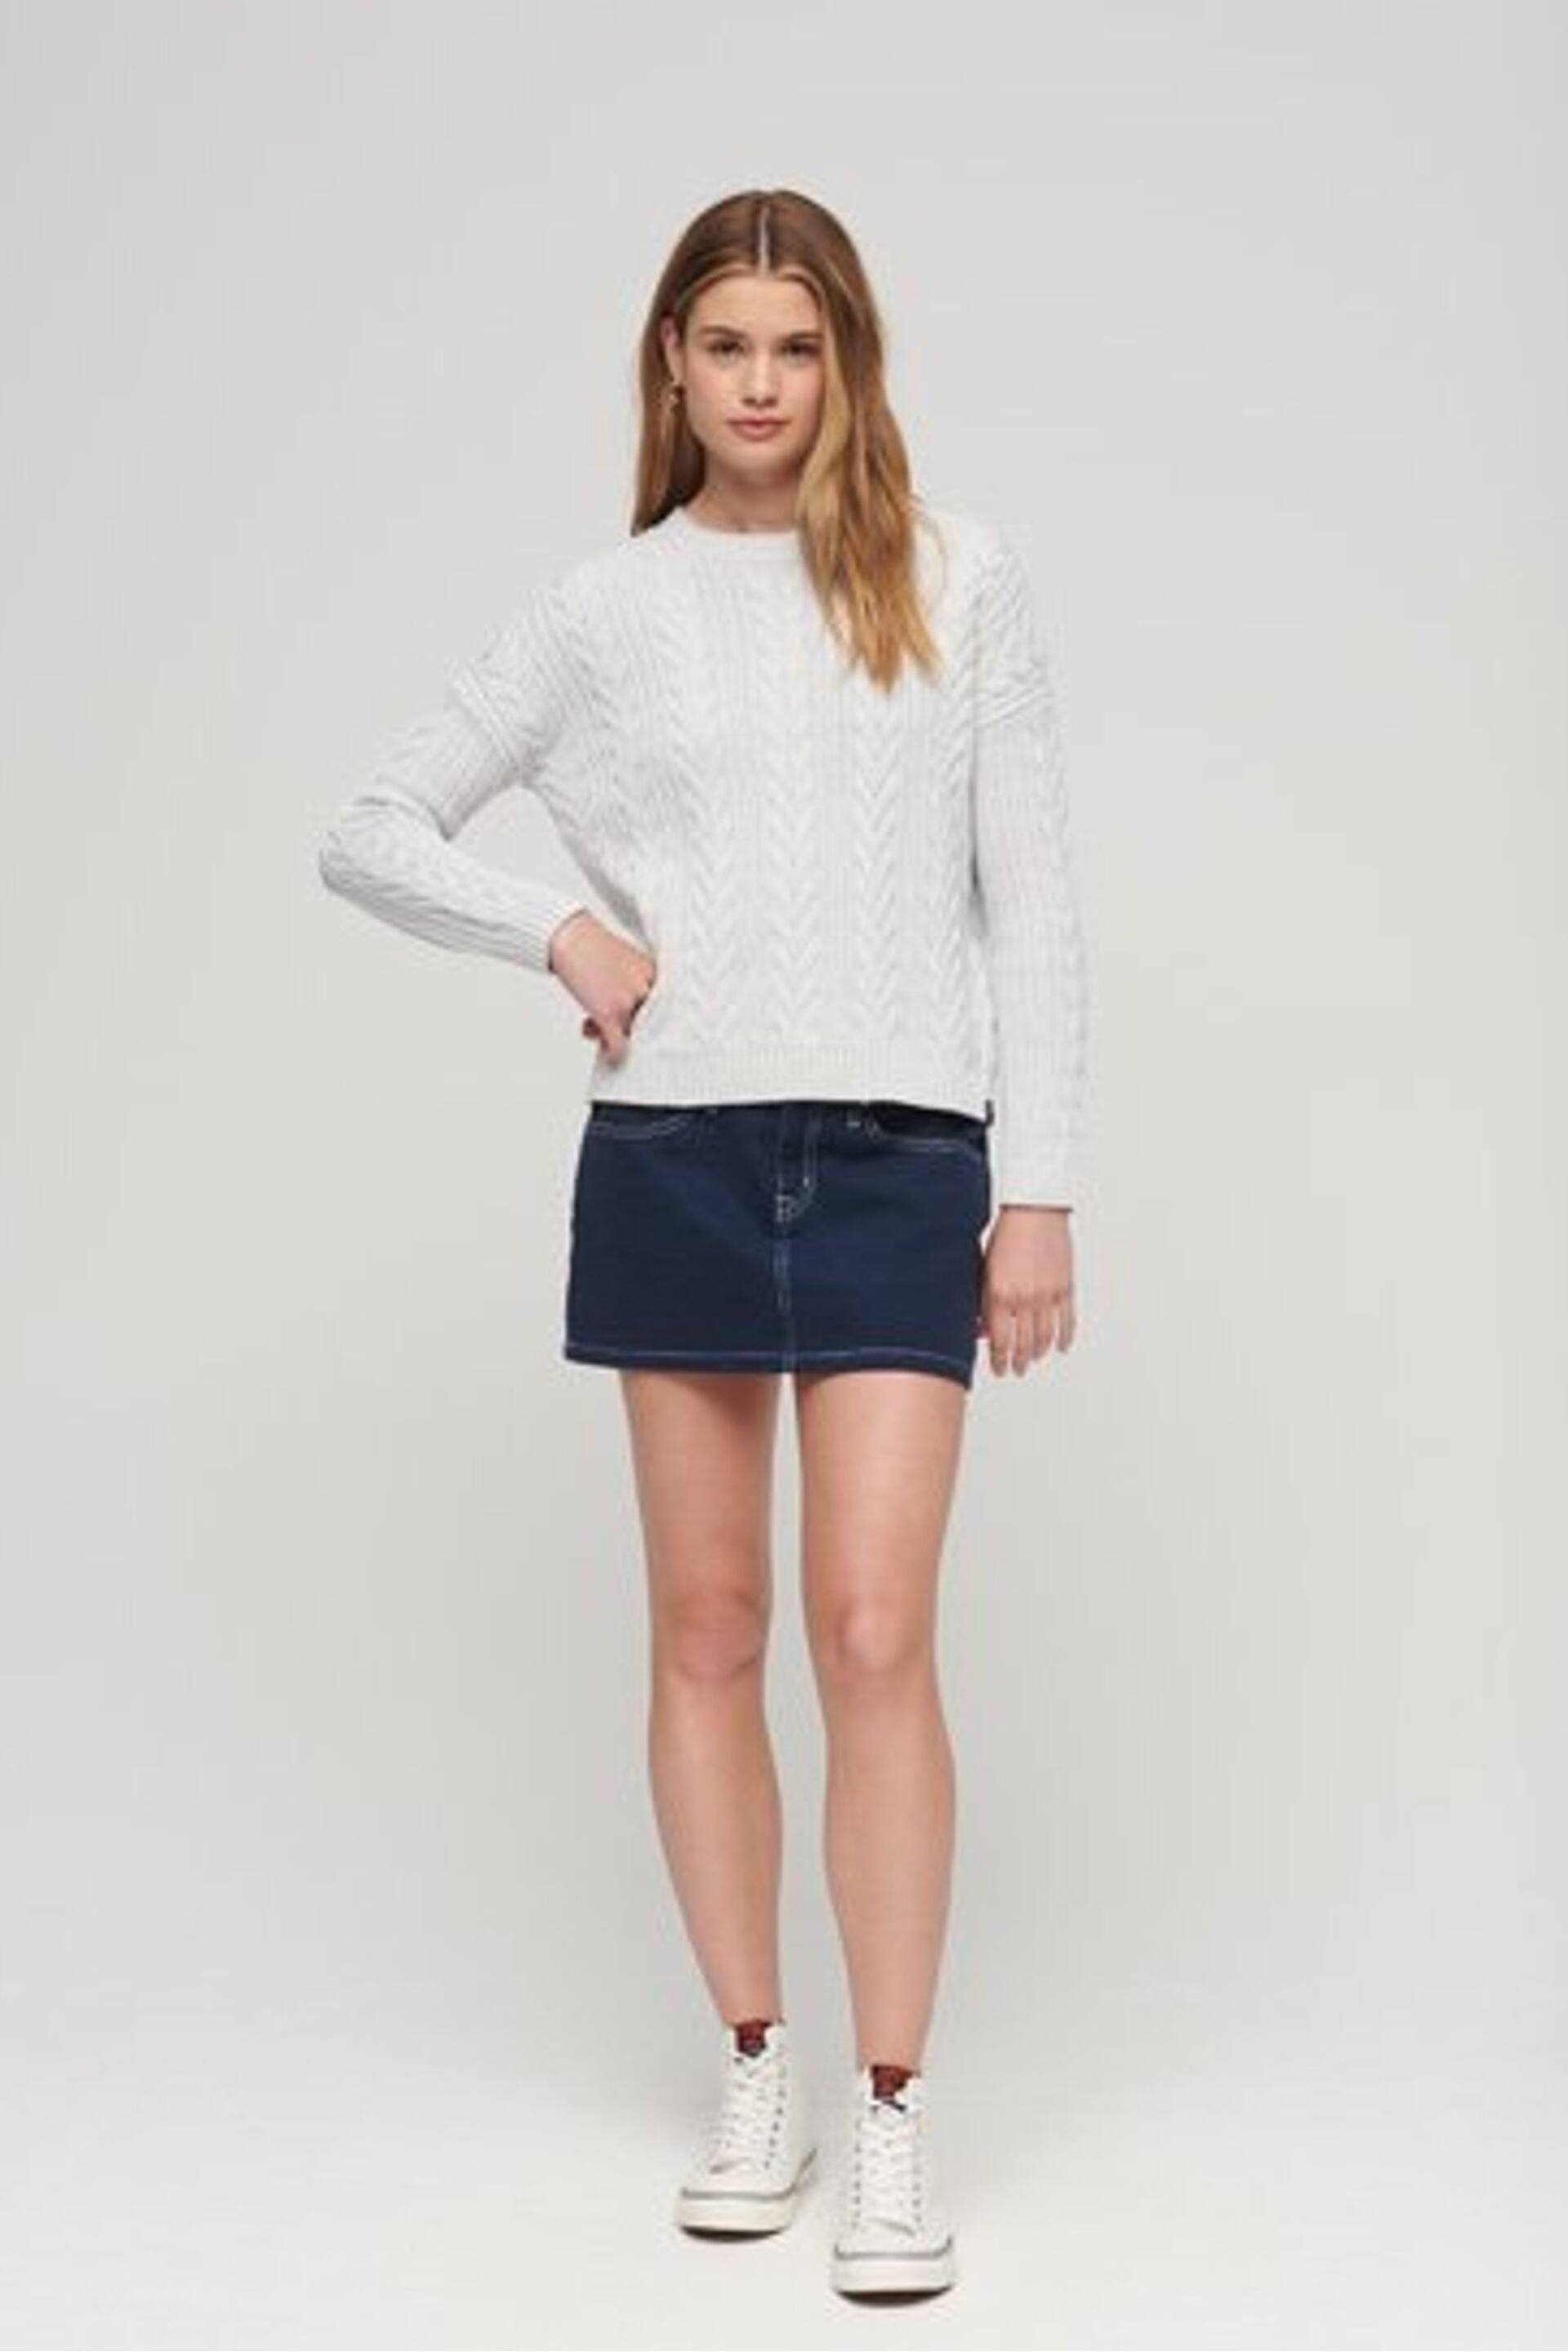 Superdry Grey Dropped Shoulder Cable Crew Jumper - Image 2 of 6